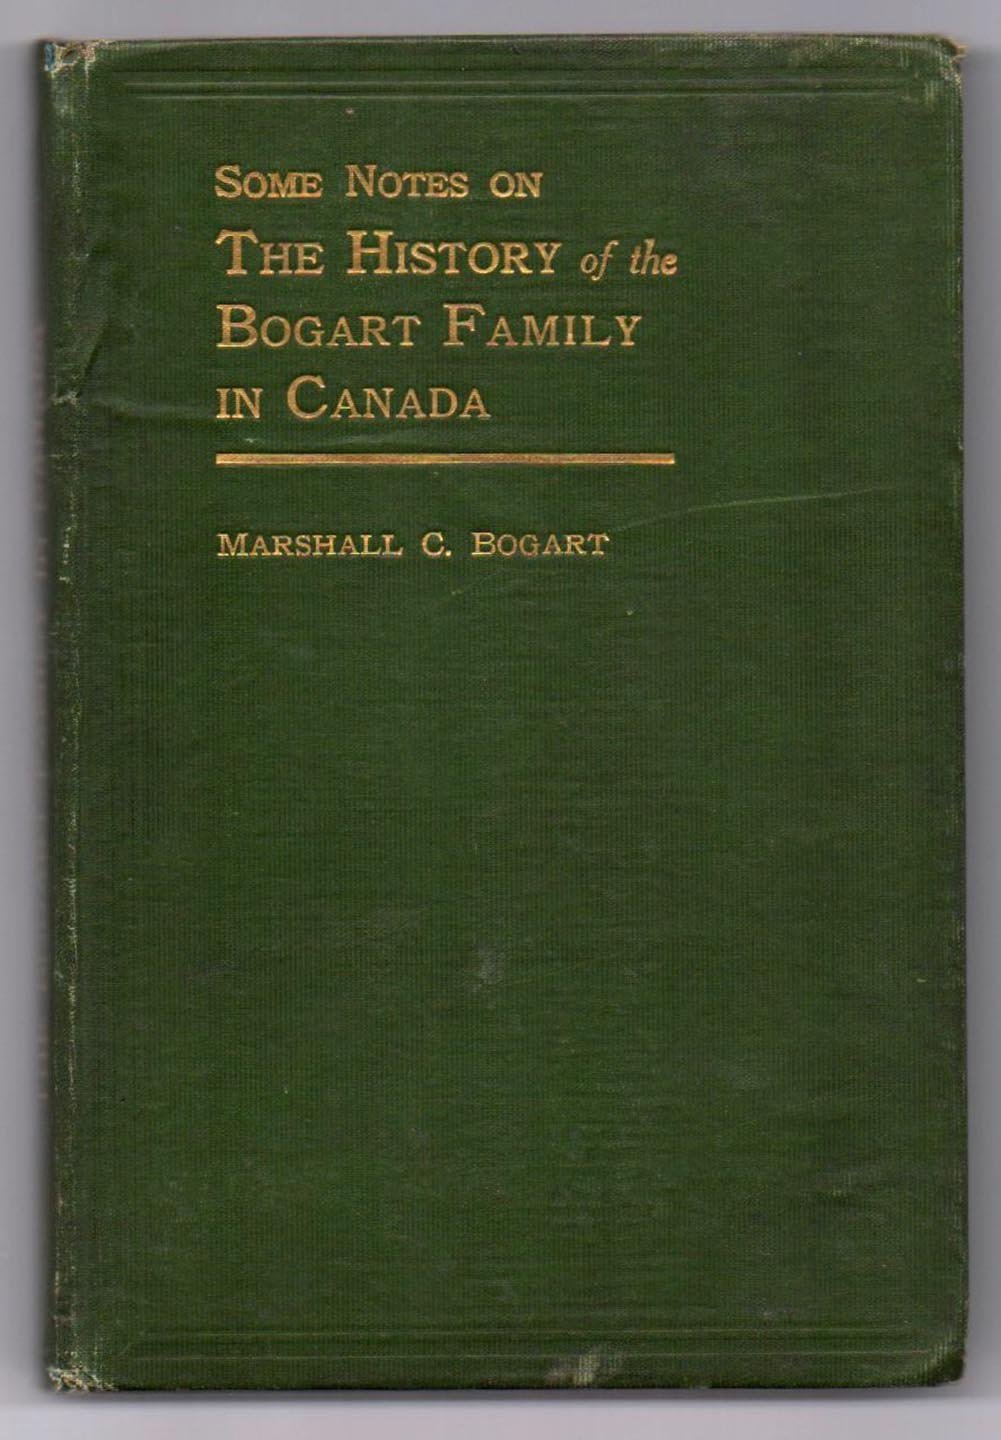 Some Notes on the History of the Bogart Family in Canada. With Genealogical Record of My Parents, Lewis Lazier Bogart and Elizabeth Cronk Bogart